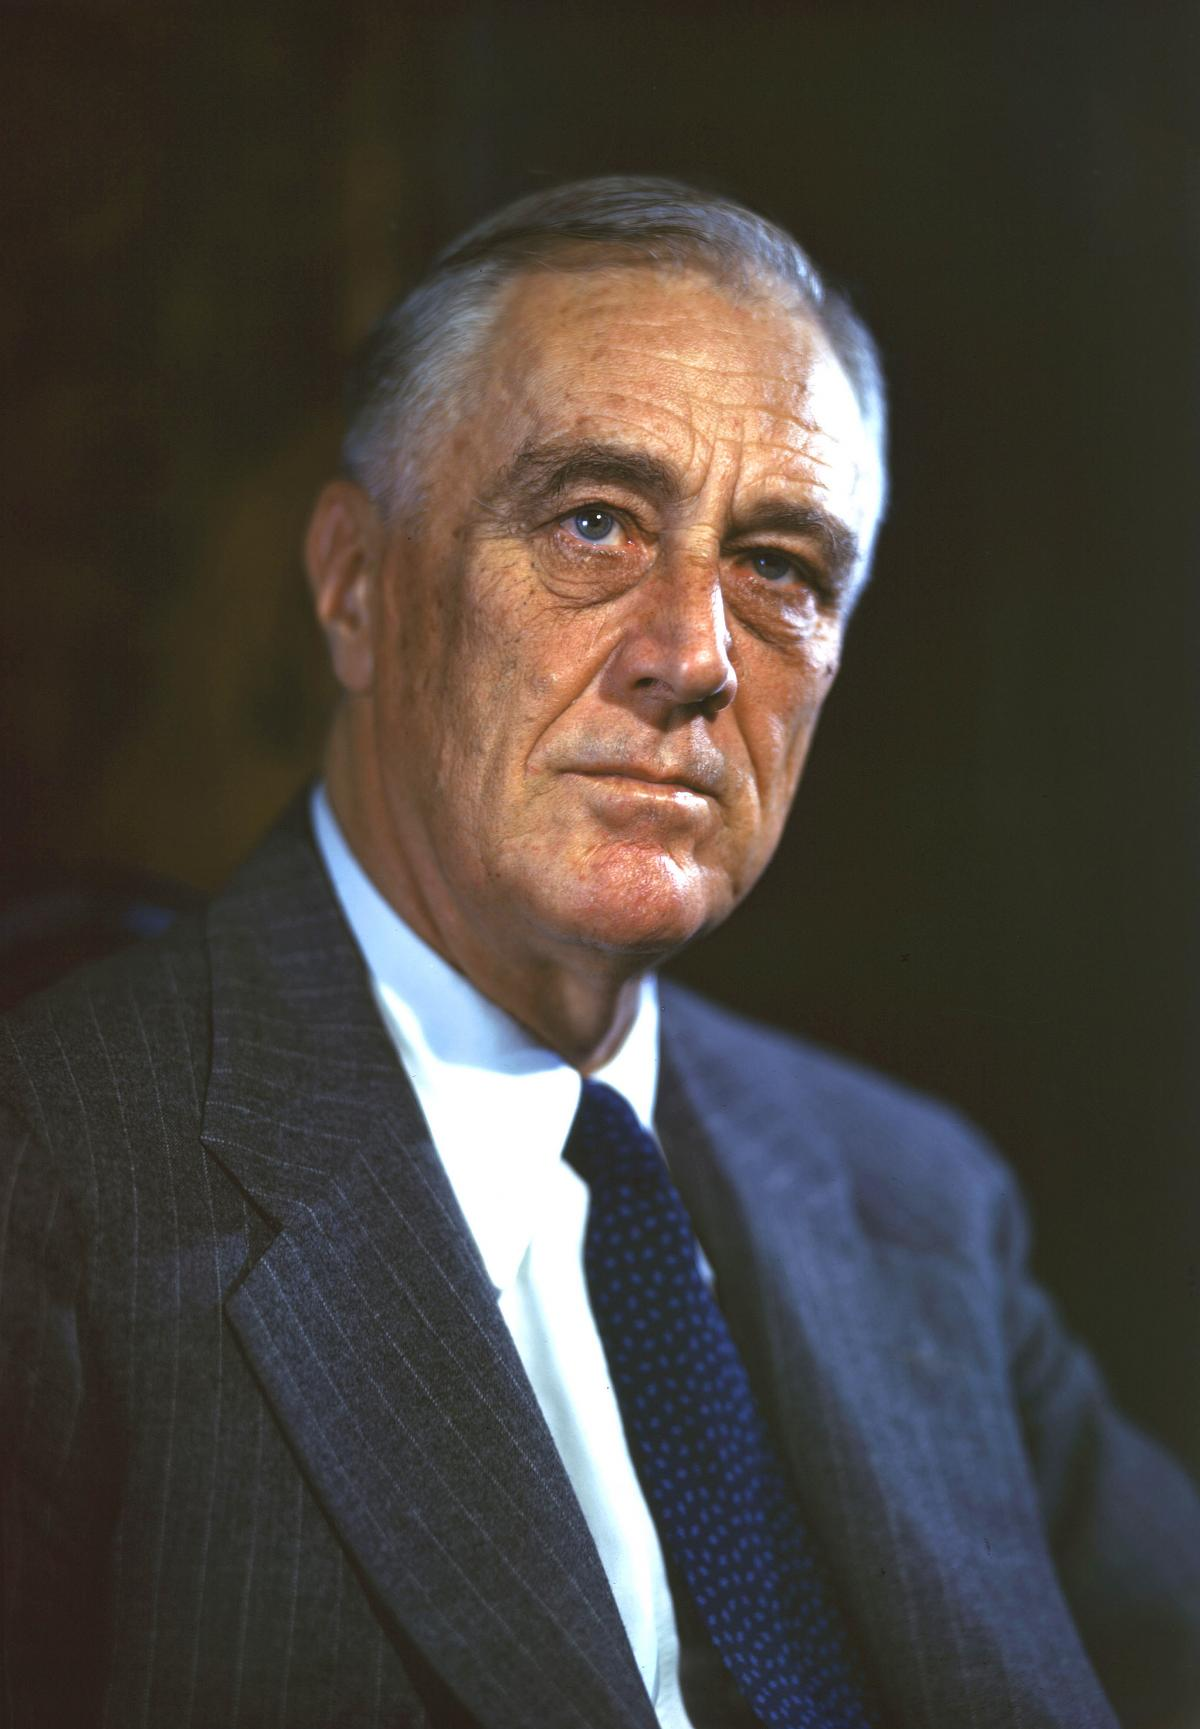 FDR, whose New Deal helped people. The GOP fought it all. Blank Meme Template